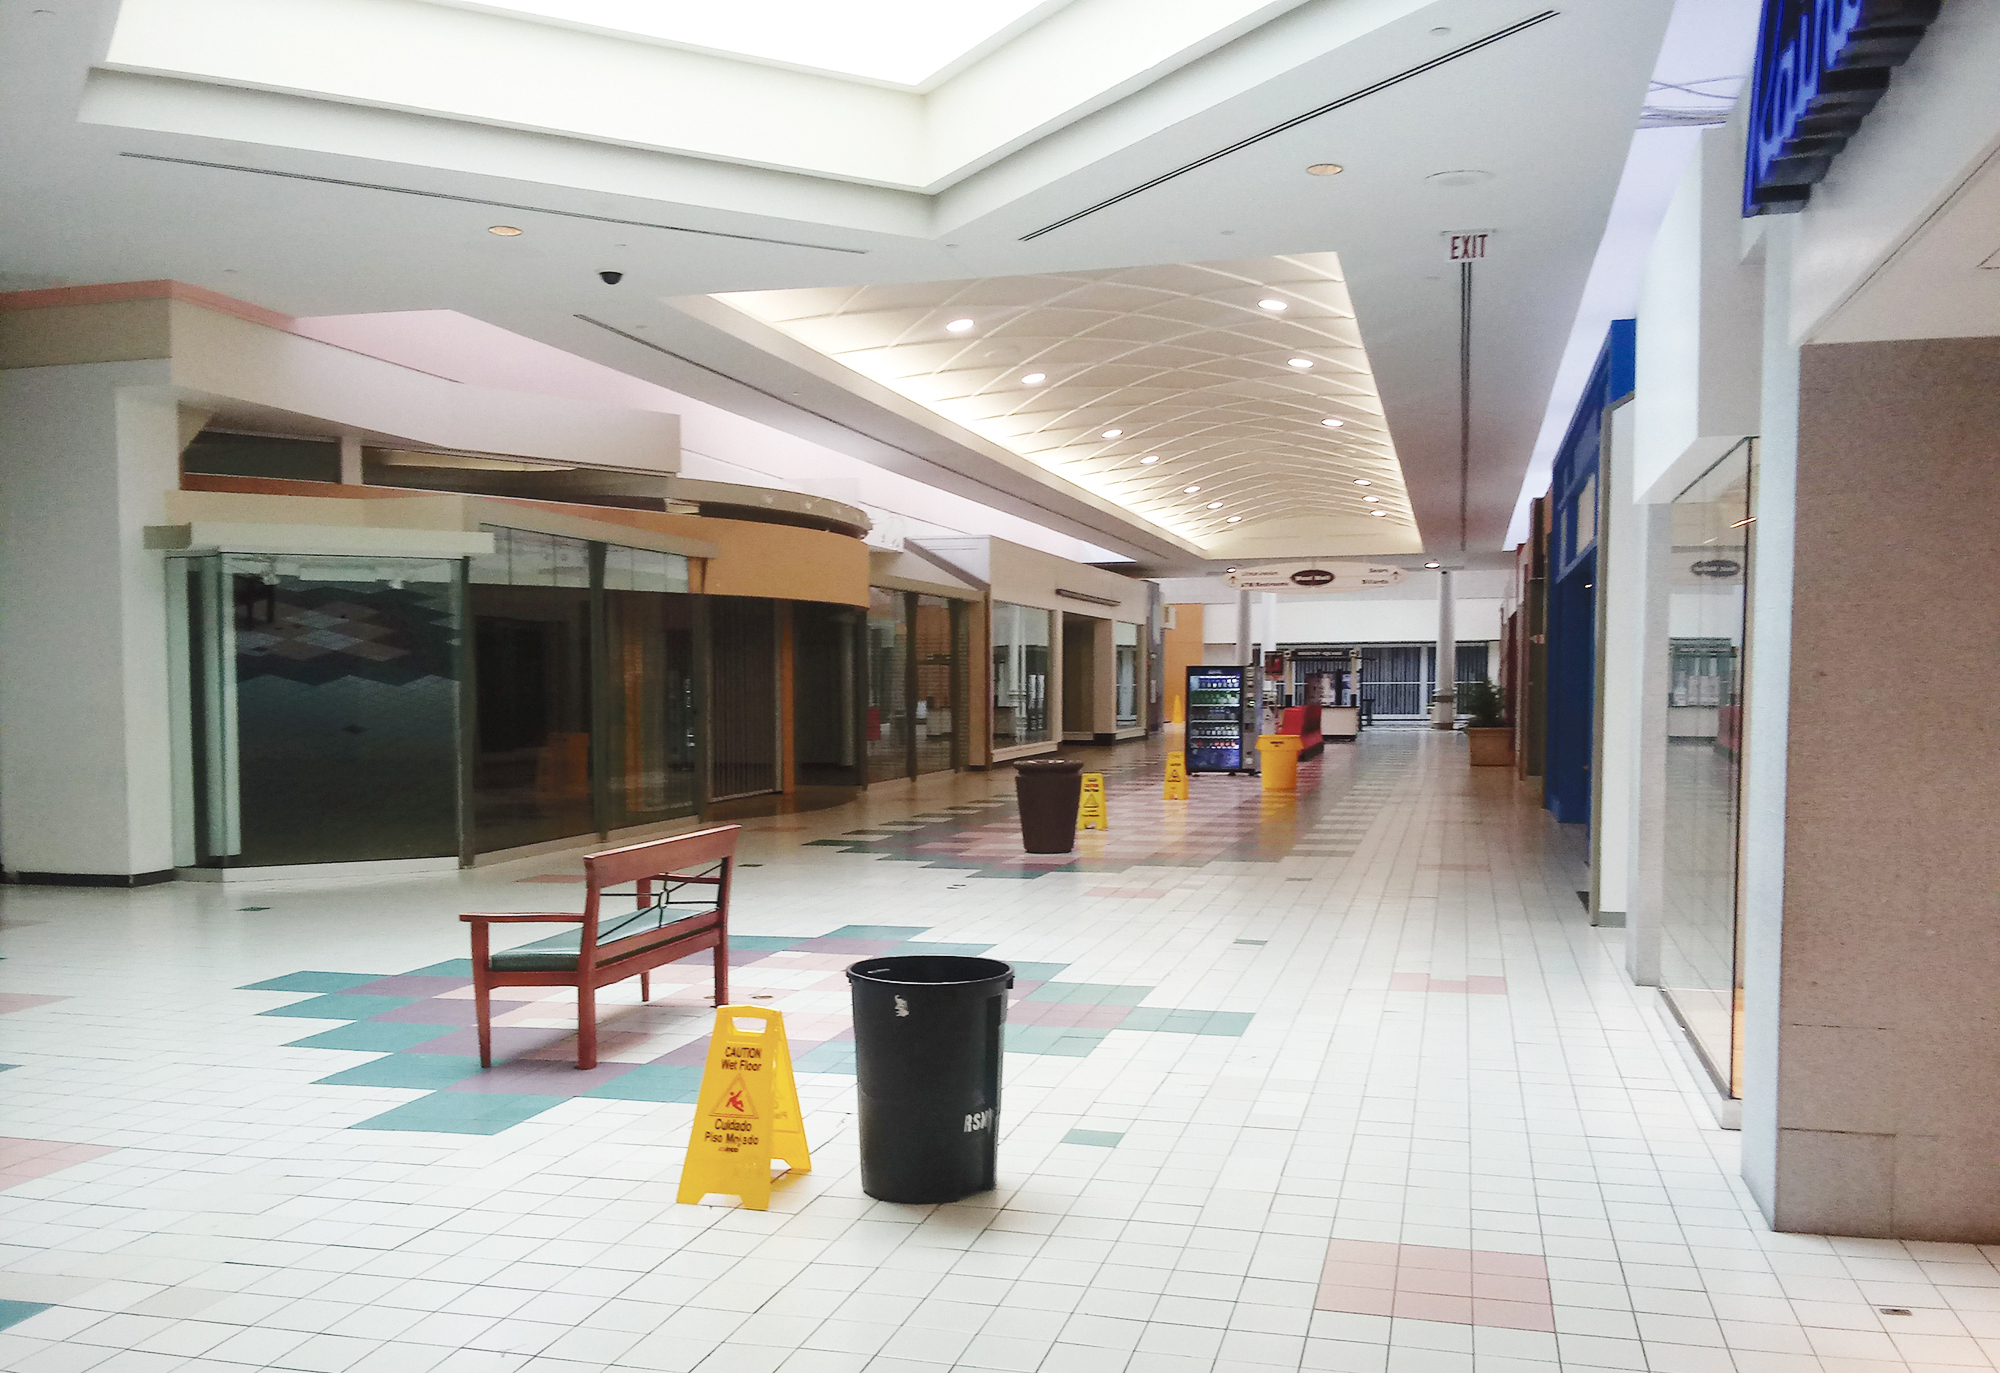 Trash cans placed in walkways to catch water leaking through the roof and “wet floor” warning signs stand in a nearly empty wing of Regency Square.